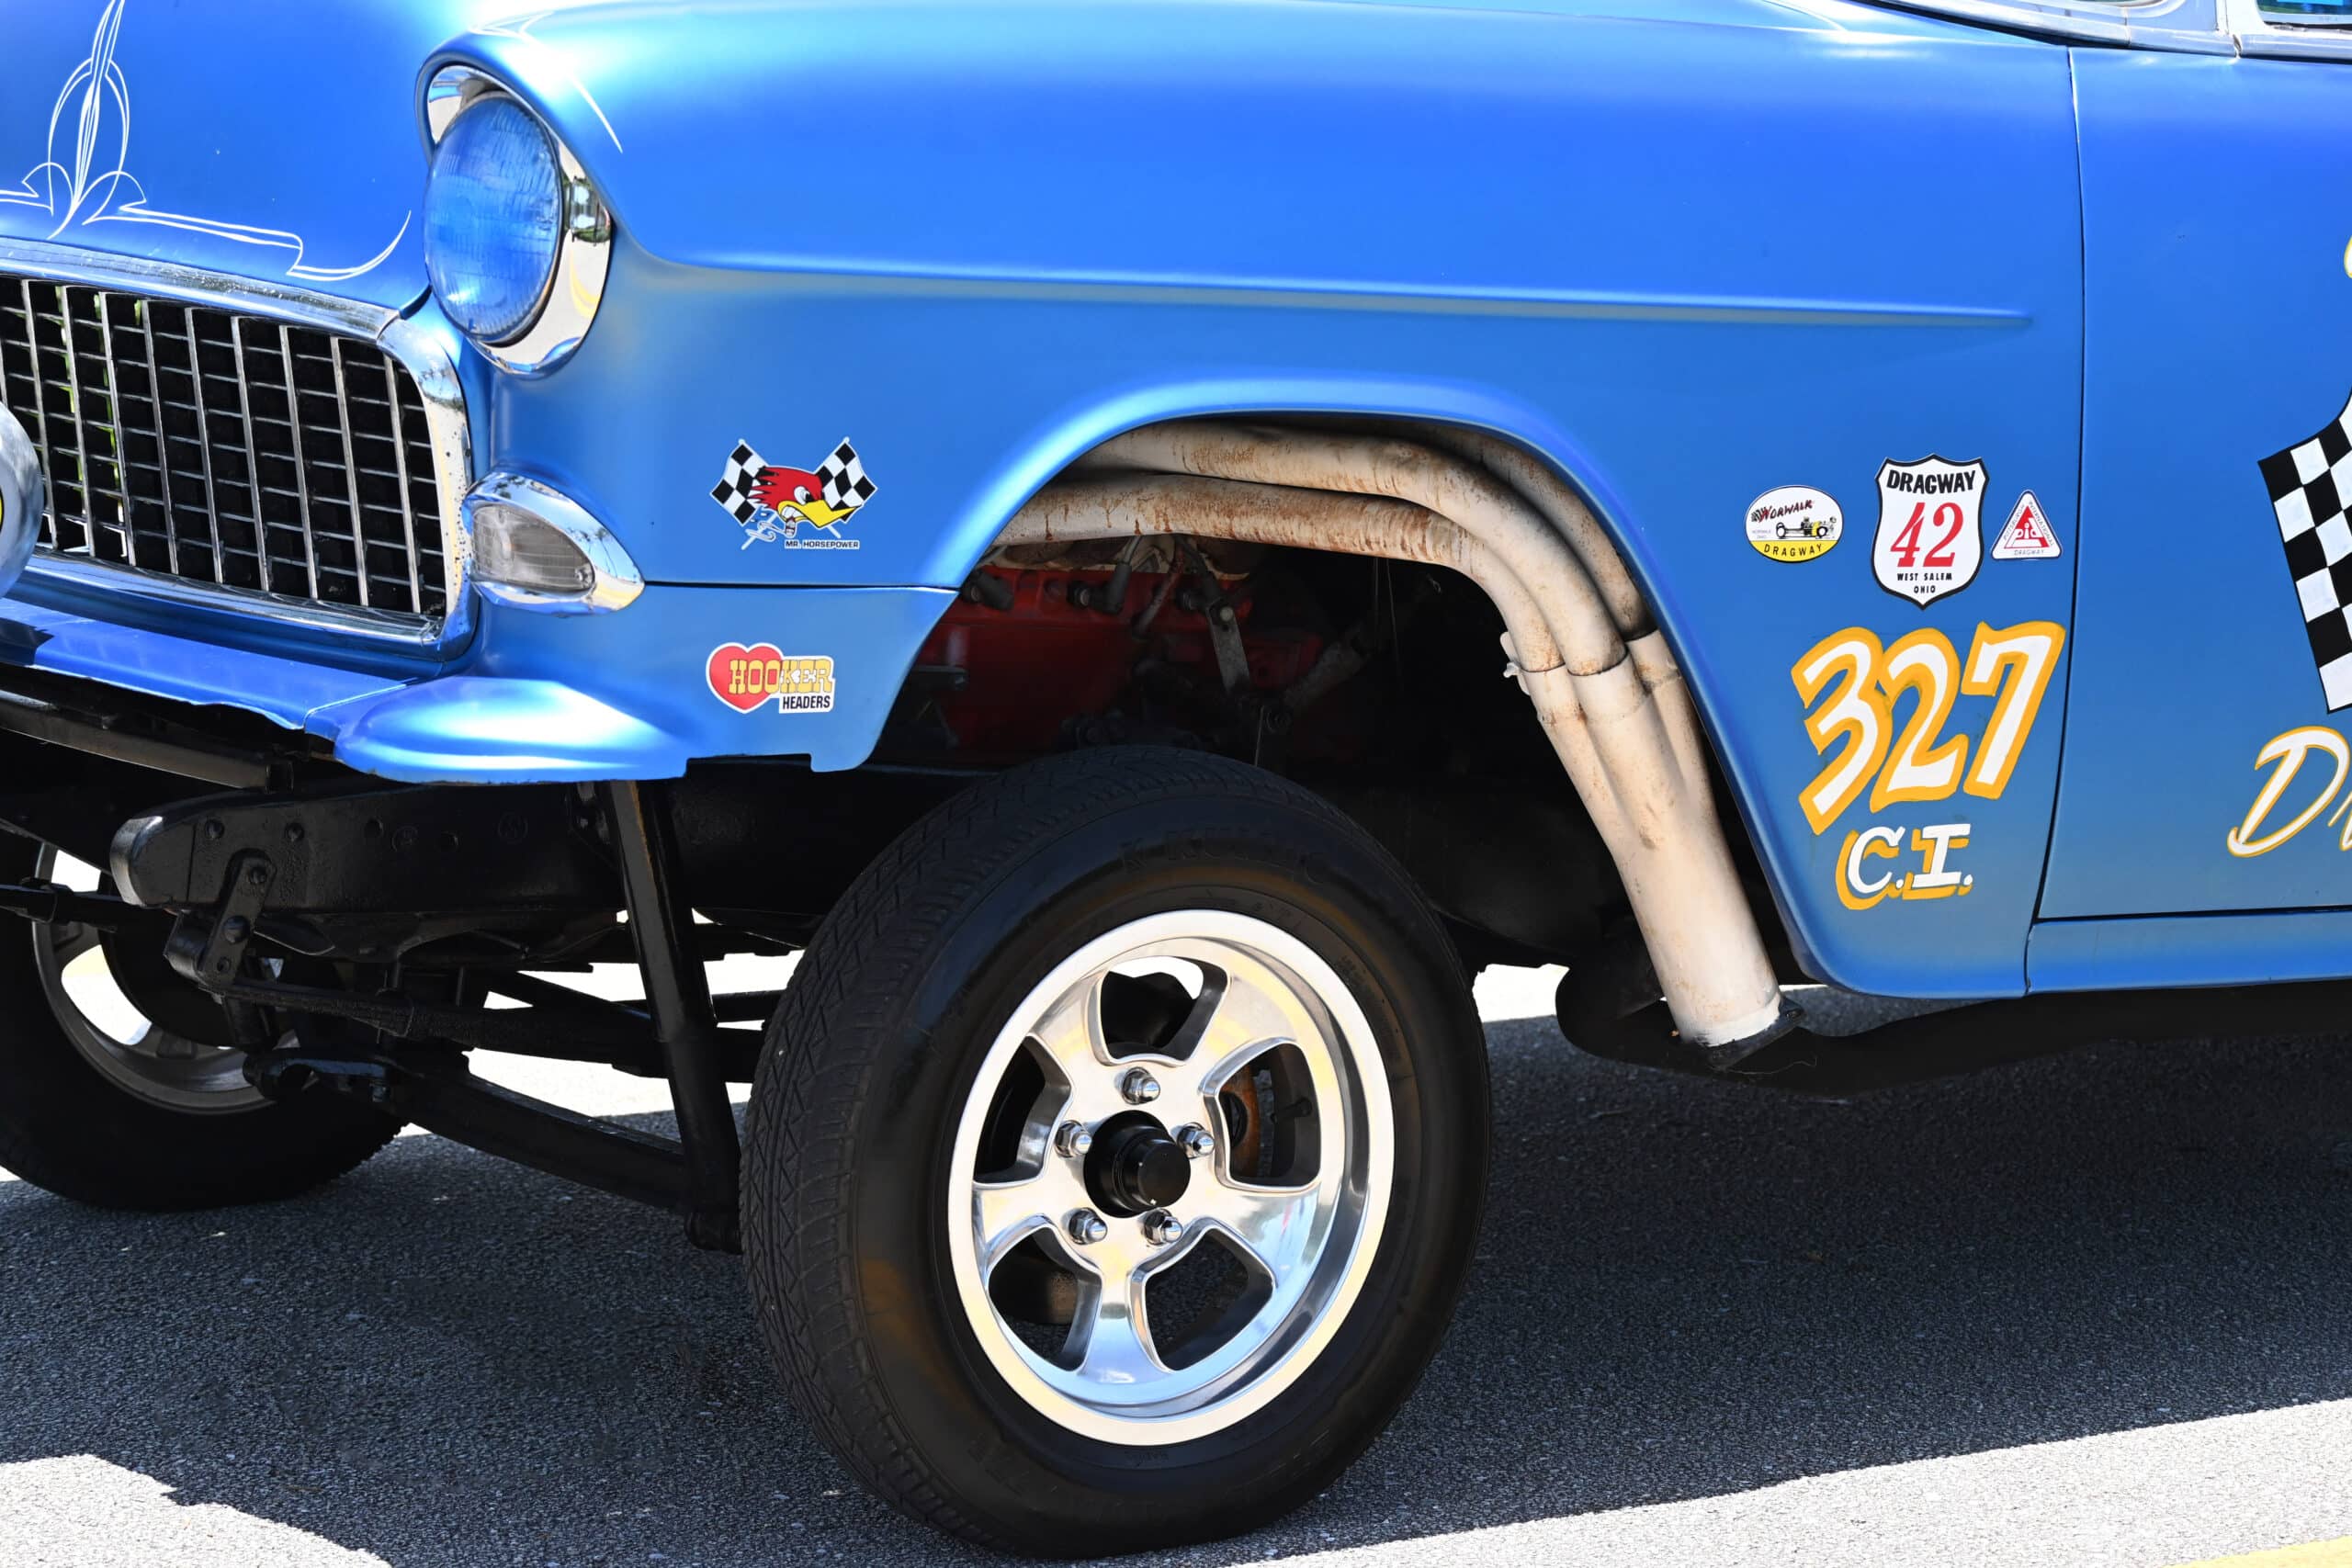 1955 Chevrolet 210 Old school “GASSER’’ 327 cubic inch and 4 speed Muncie transmission and 12 bolt posi diff – front disk brakes with corvette master cylinder